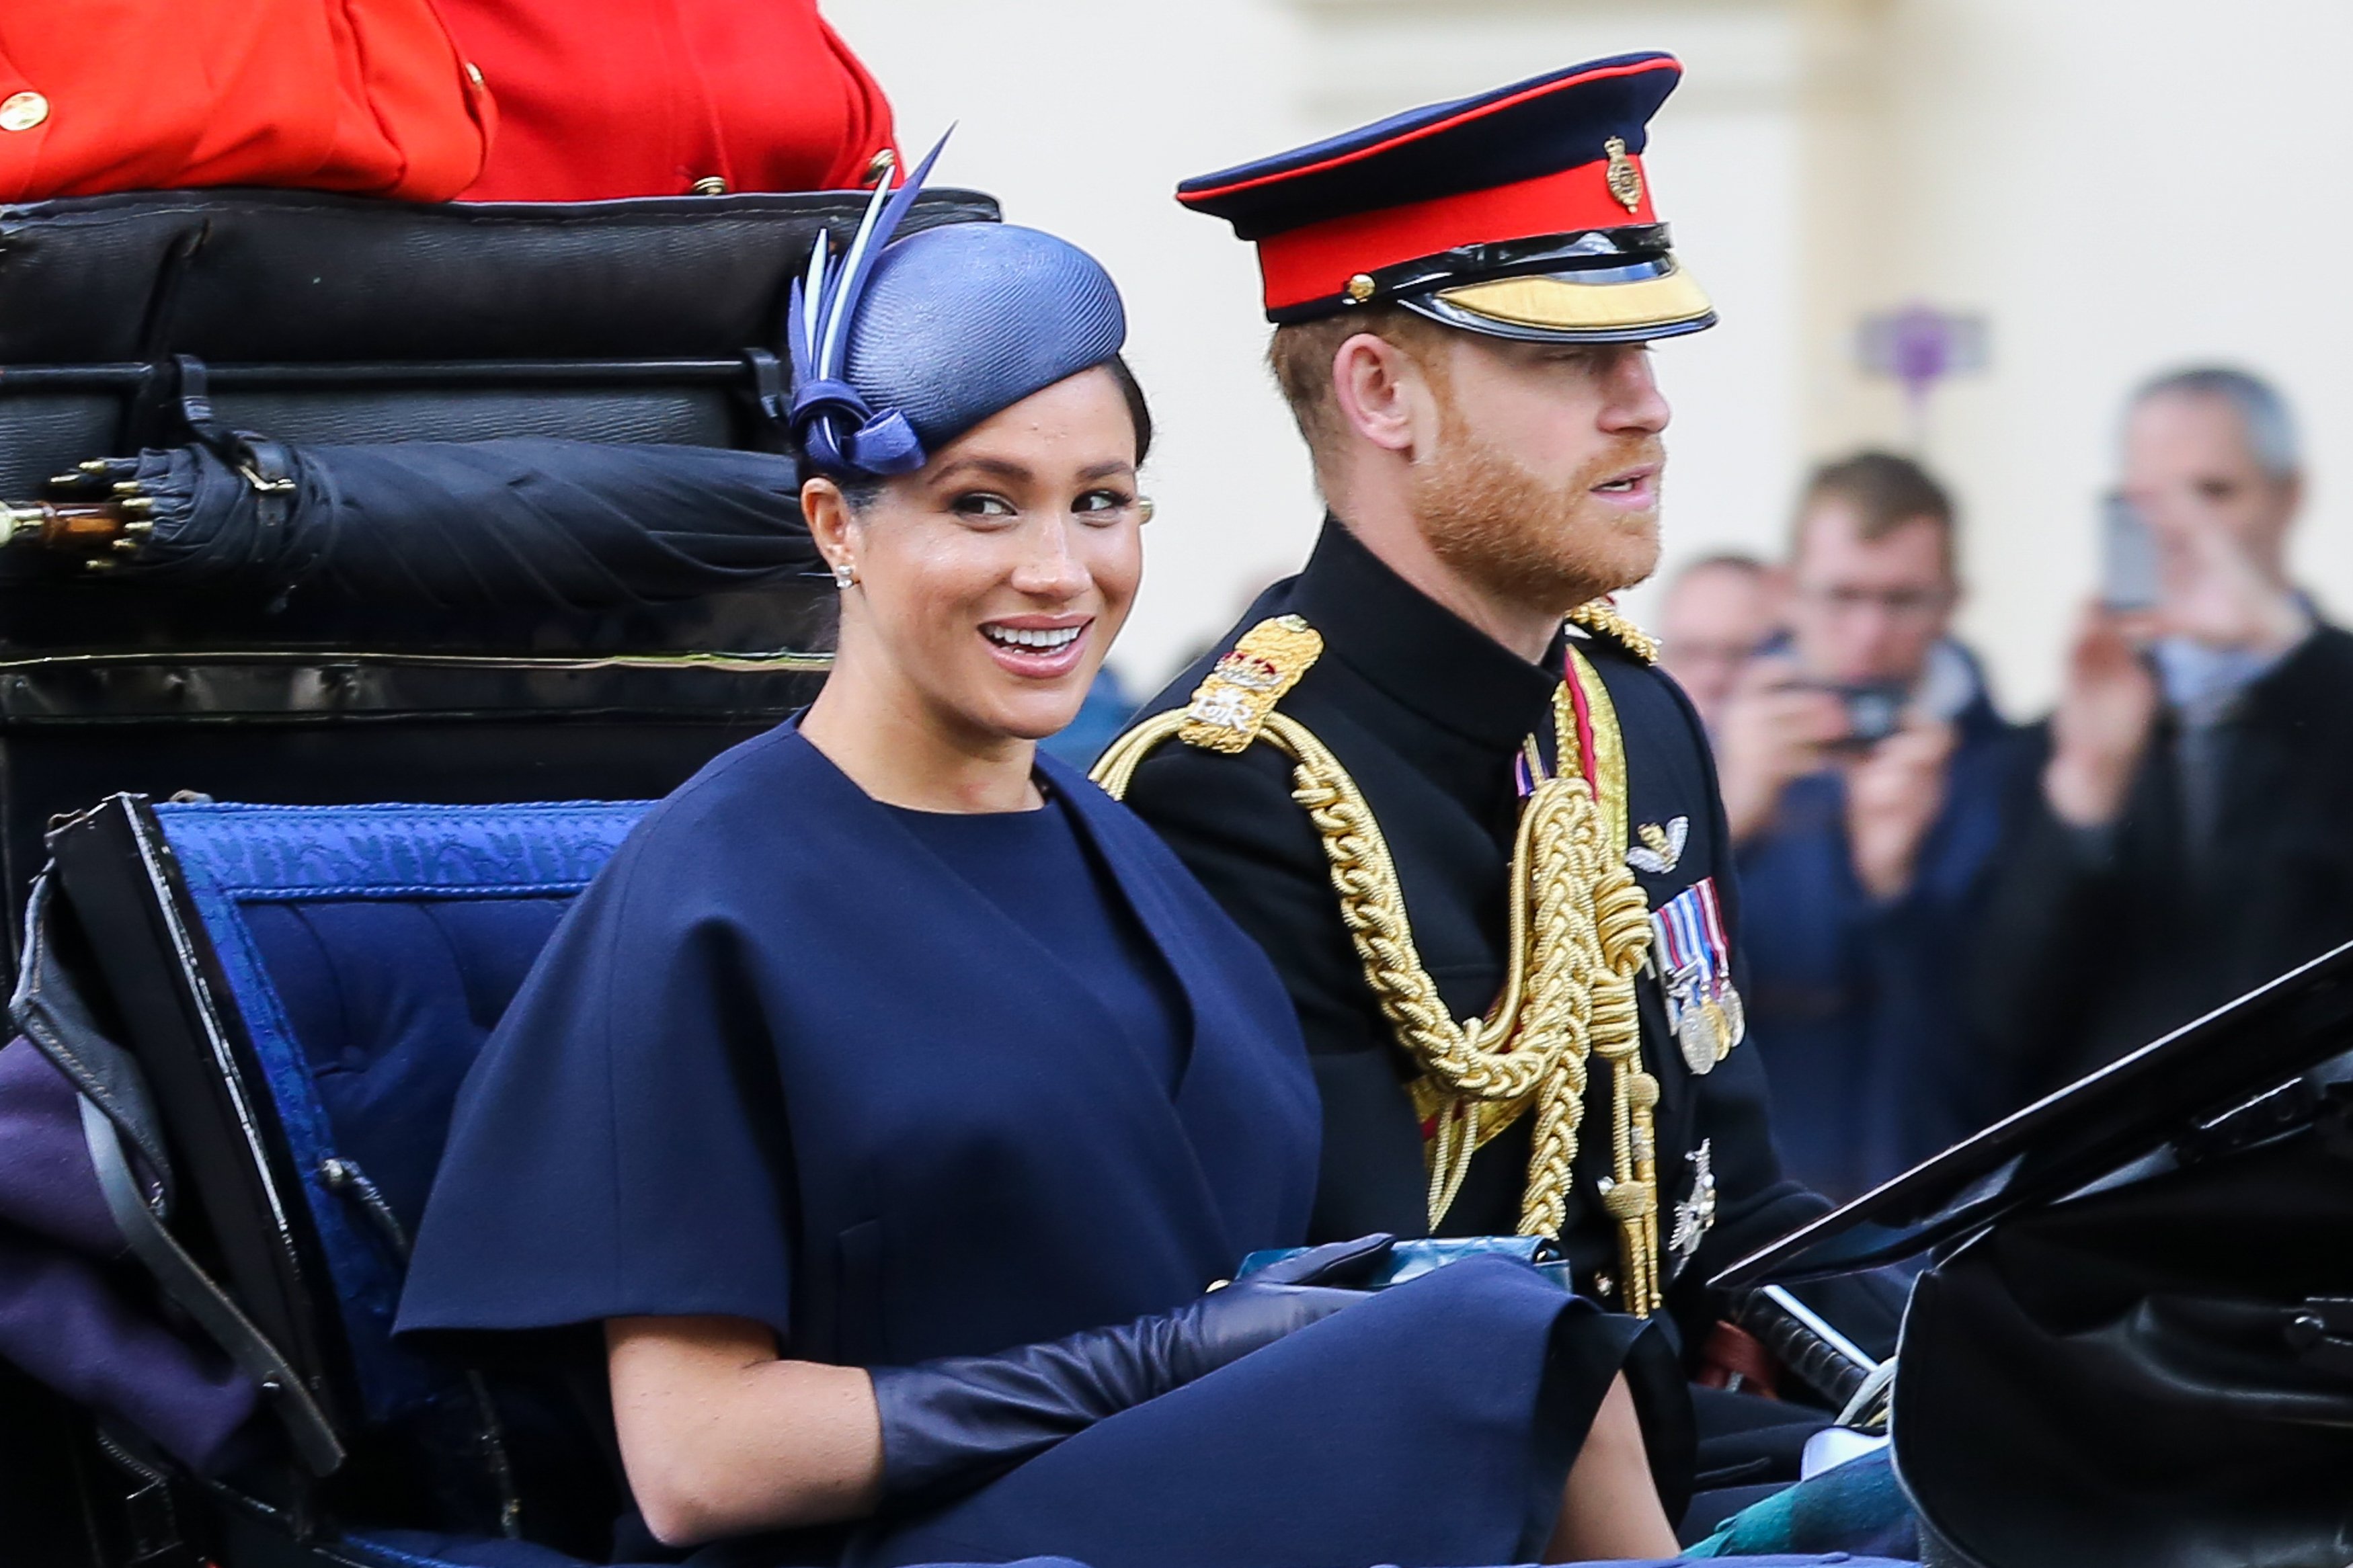 Meghan Duchess of Sussex and Prince Harry are seen in a carriage on their way to Buckingham Palace after attending the Trooping the Color ceremony, which marks the 93rd birthday of, Queen Elizabeth II, Britain's longest reigning monarch. | Source: Getty Images